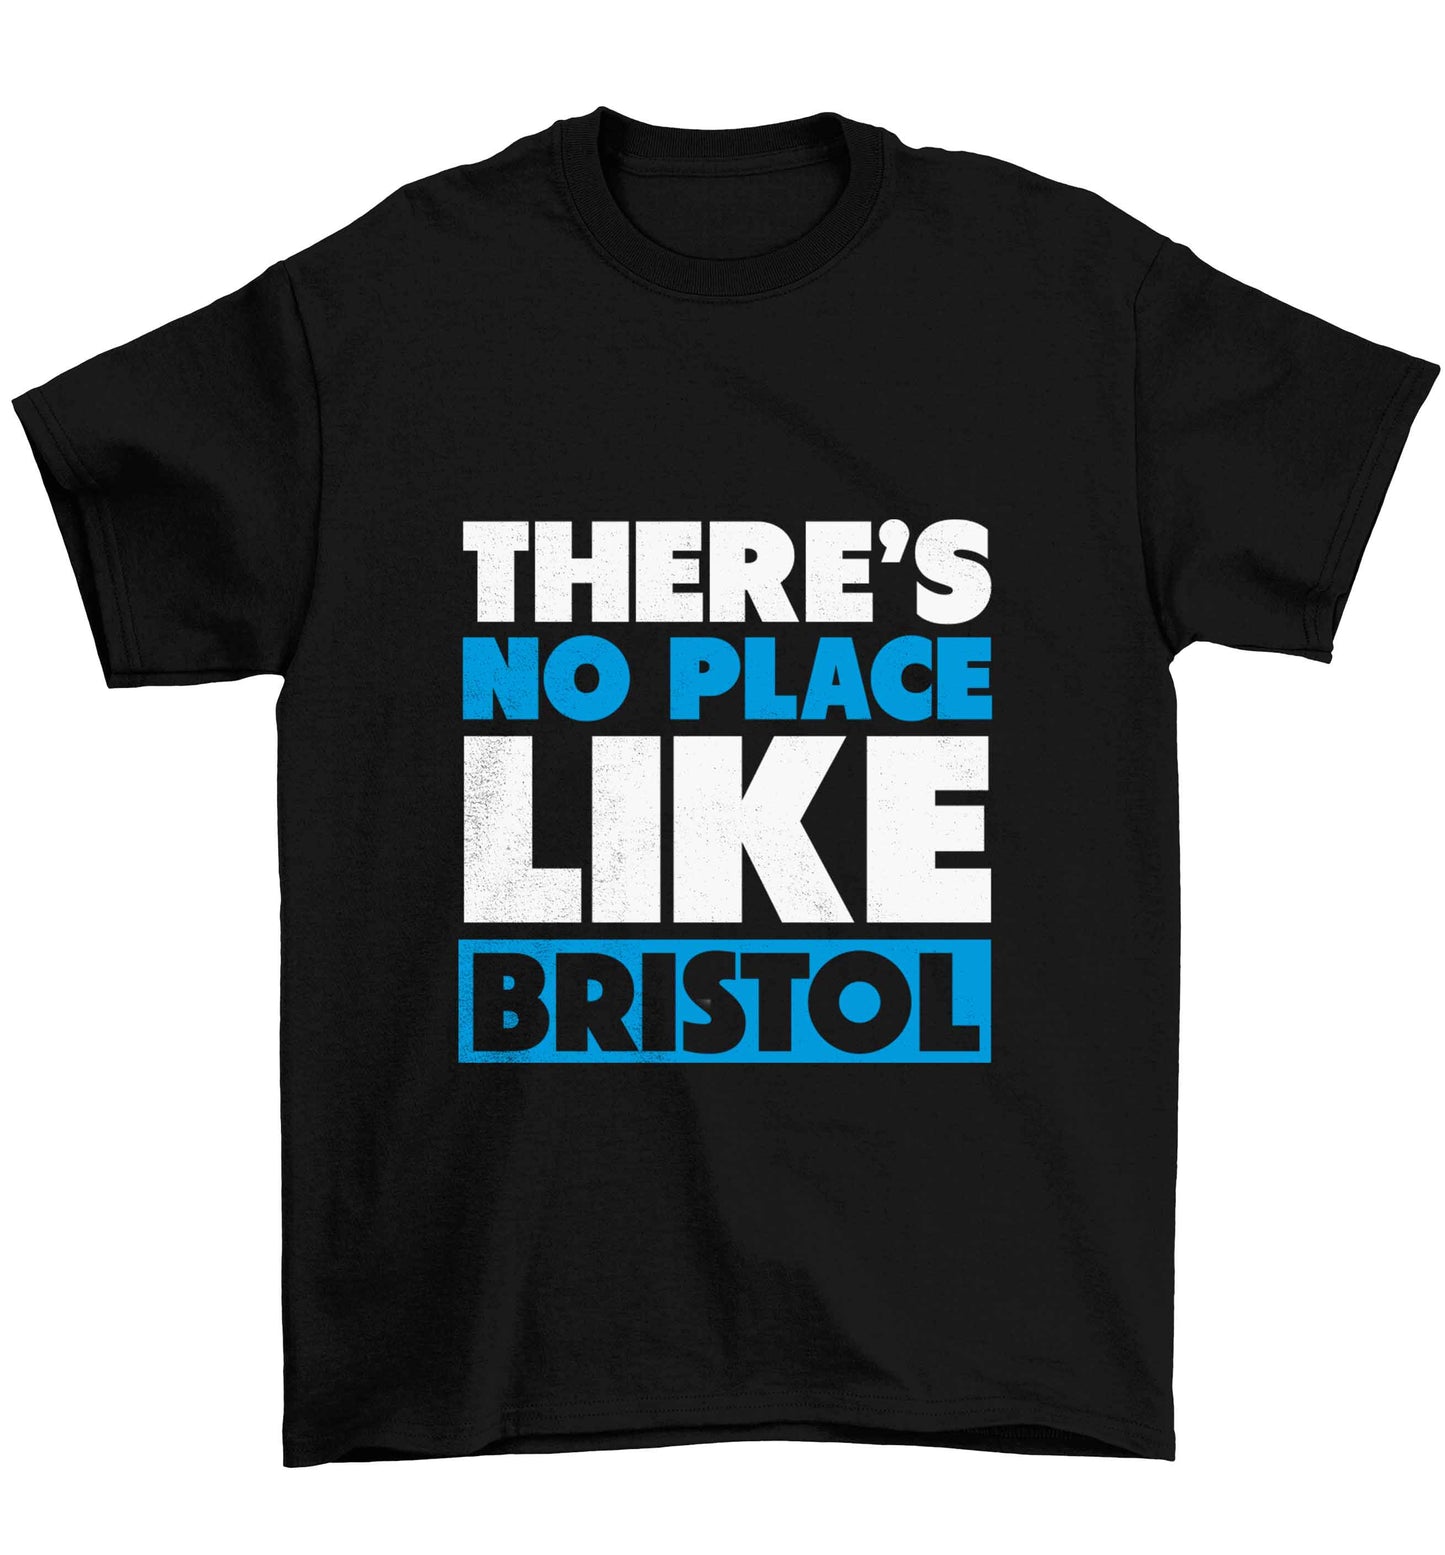 There's no place like Bristol Children's black Tshirt 12-13 Years